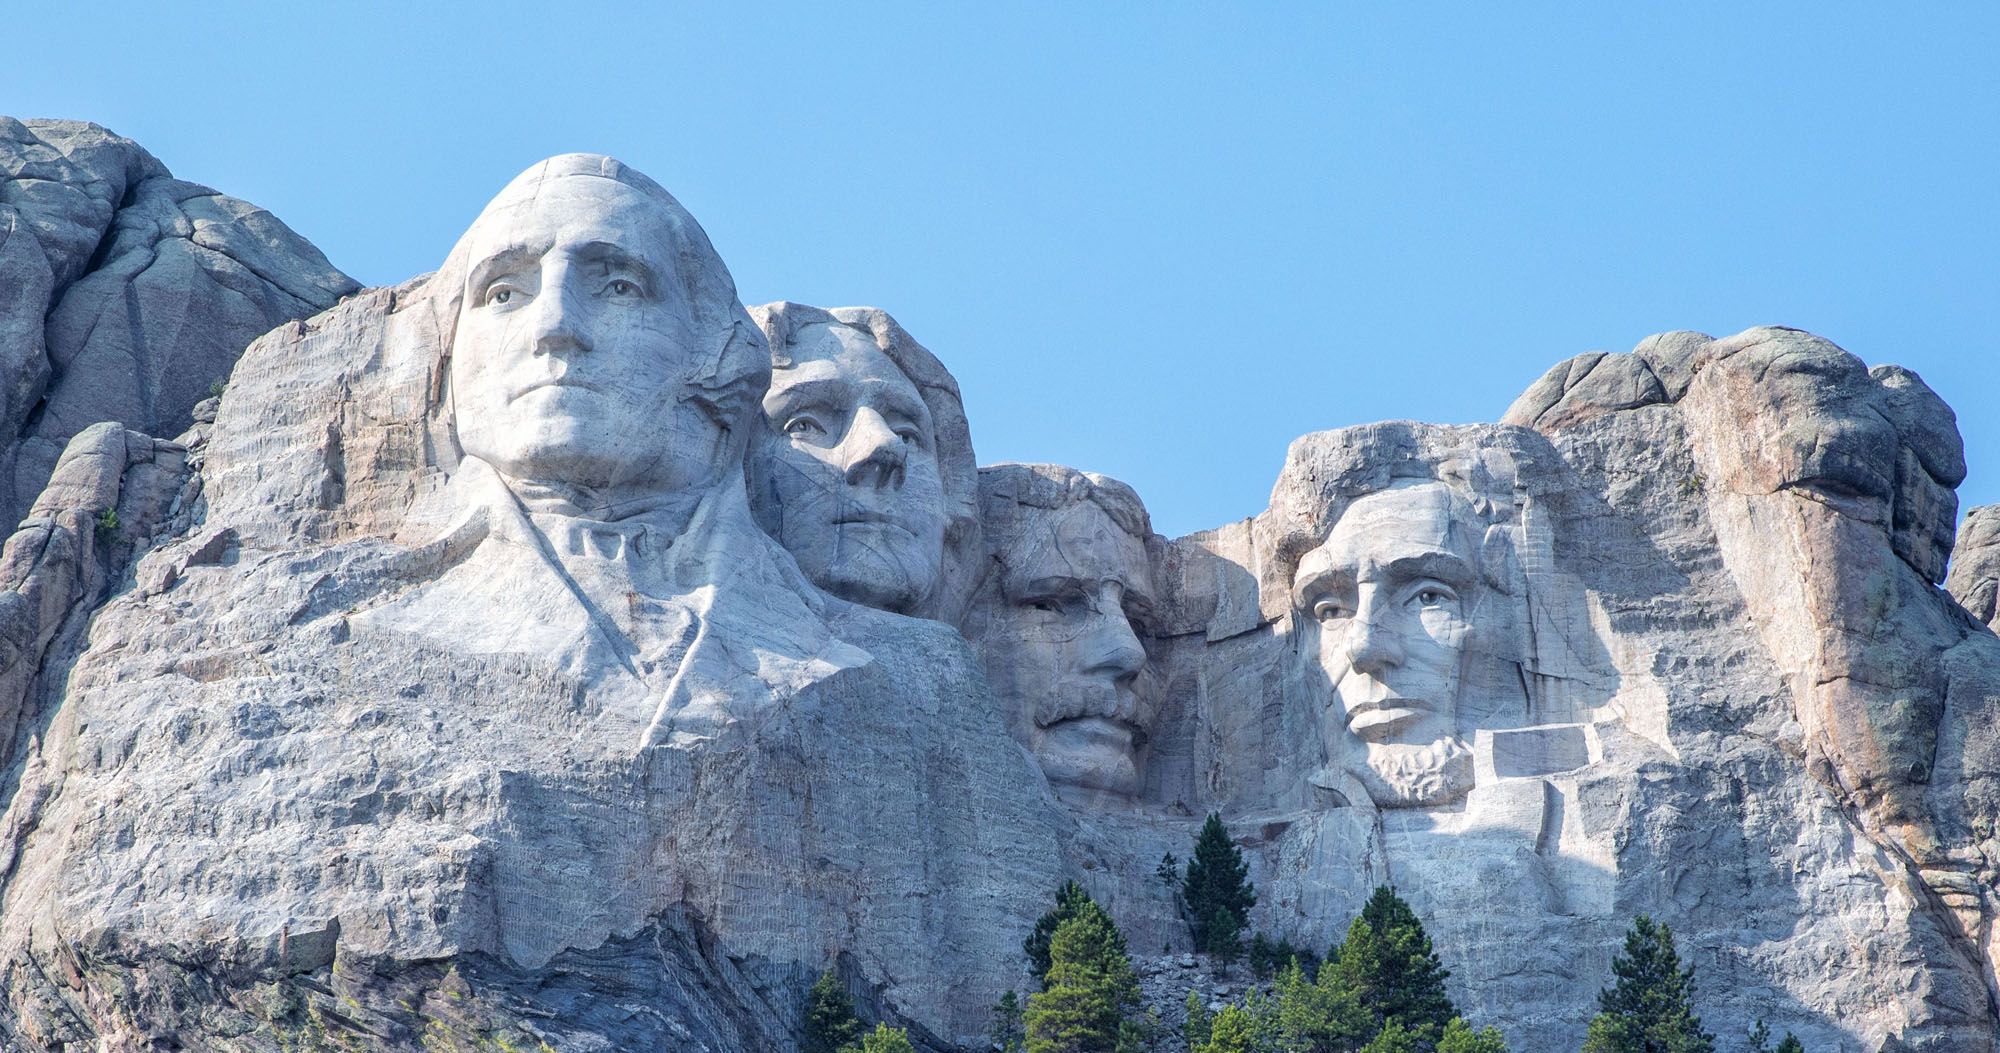 Featured image for “How to Visit Mount Rushmore: 10 Things to Know Before You Go”